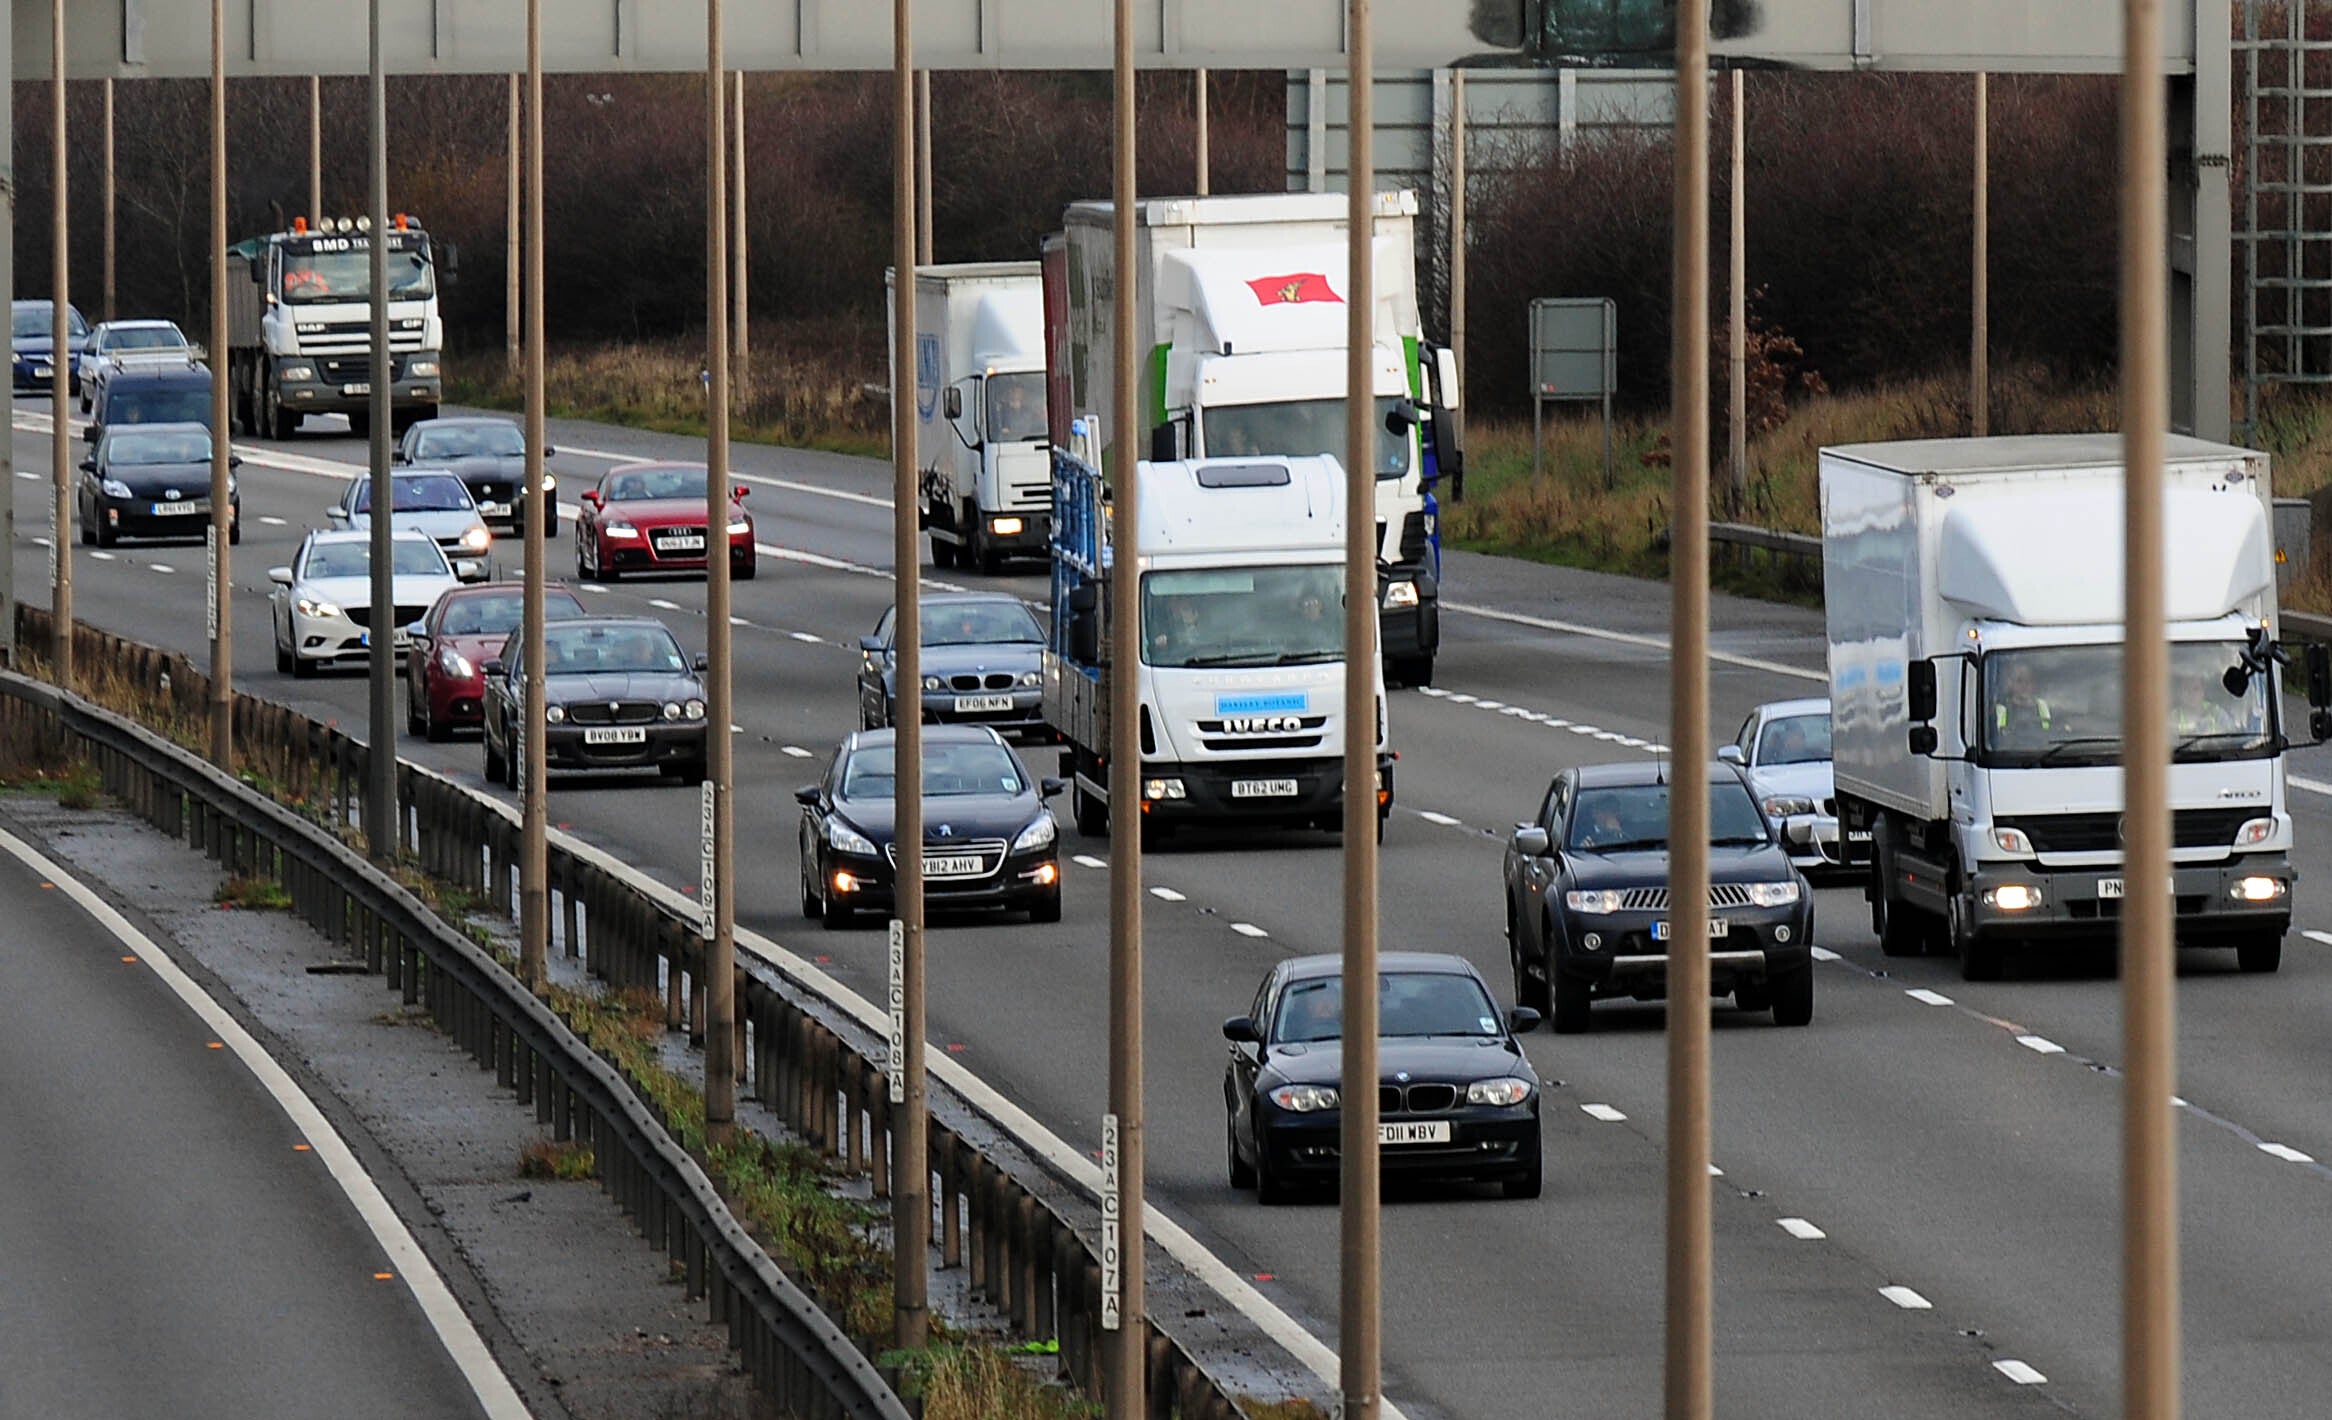 The average cost of a motor insurance premium has increased by 7.8% over the first five months of 2022, to reach £786, according to Consumer Intelligence (Rui Vieira/PA)